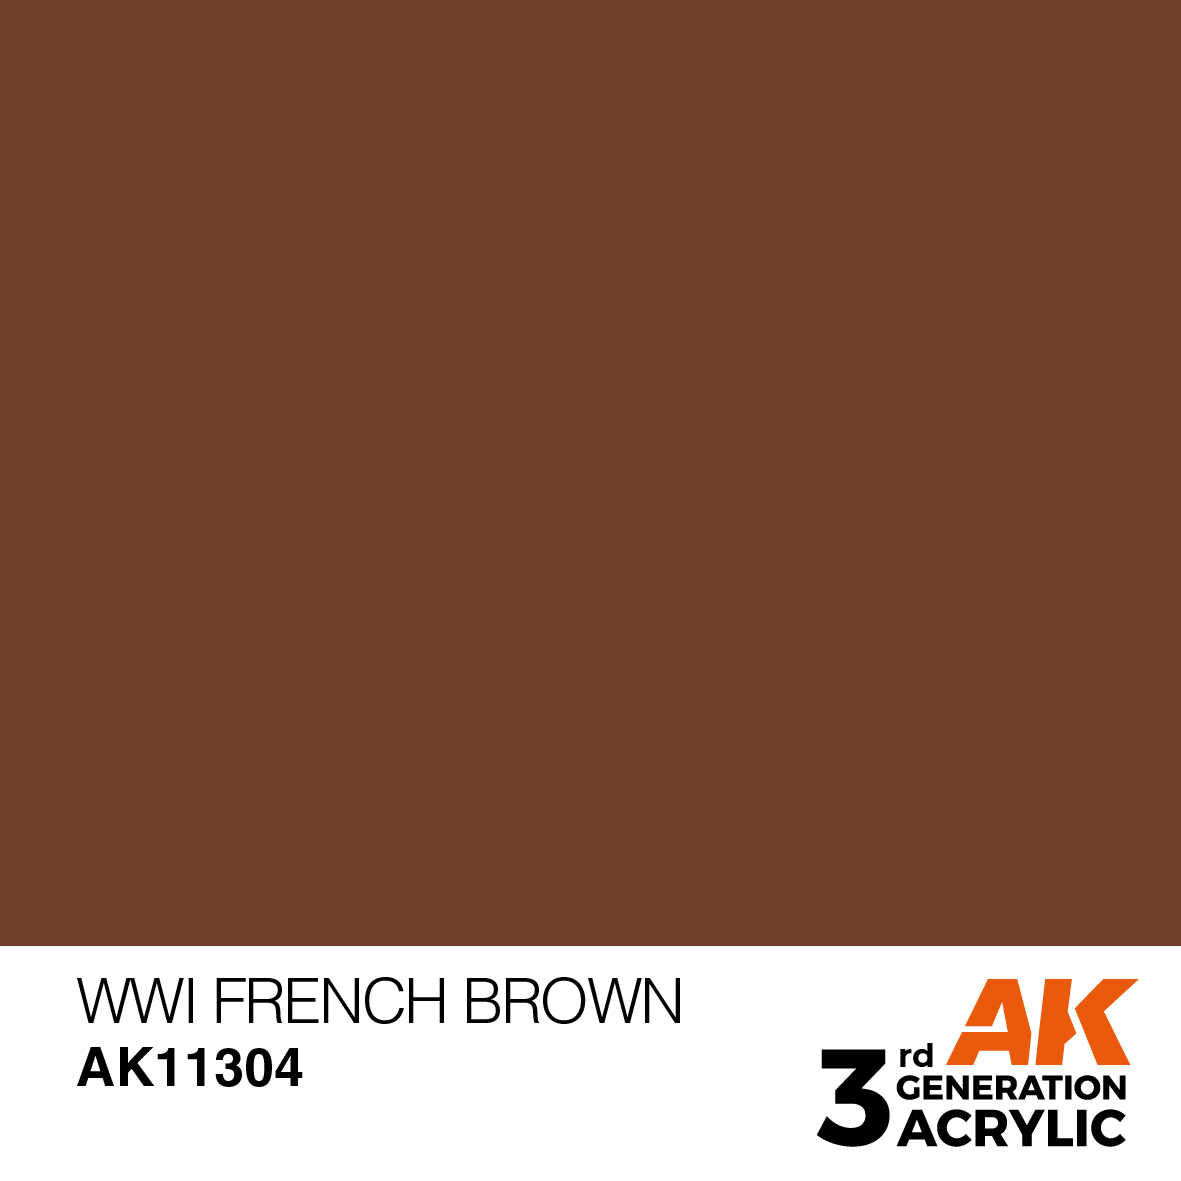 WWI FRENCH BROWN – AFV